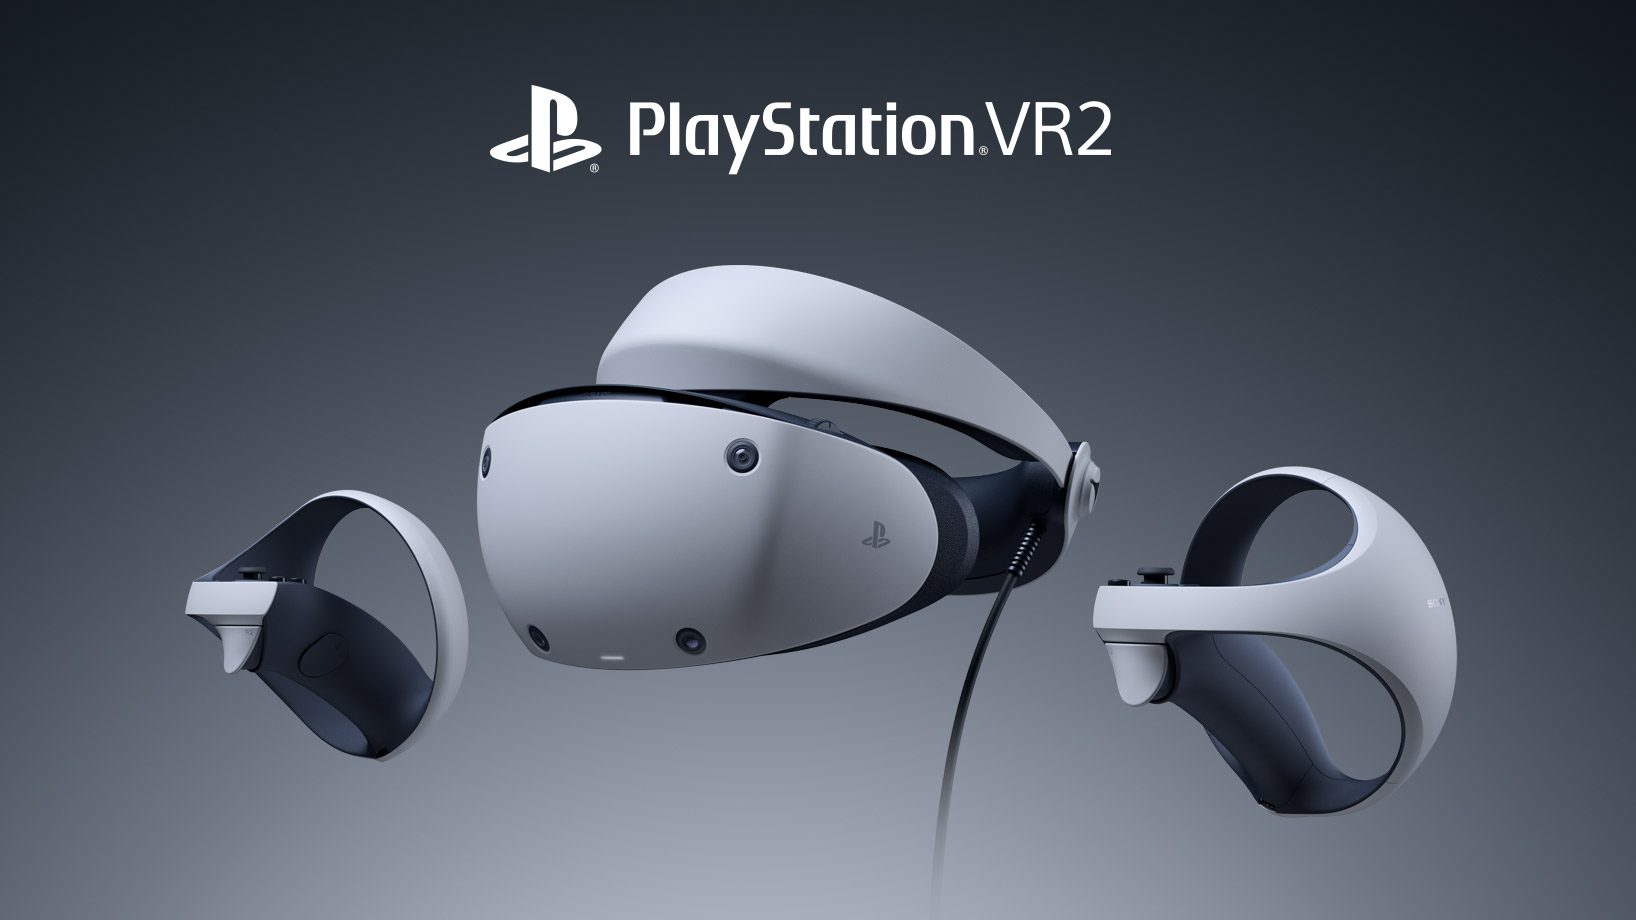 Ready go to ... https://www.roadtovr.com/report-sony-psvr-2-preorder-sales/ [ Update: Sony Refutes Report That It Cut PSVR 2 Production Forecast]